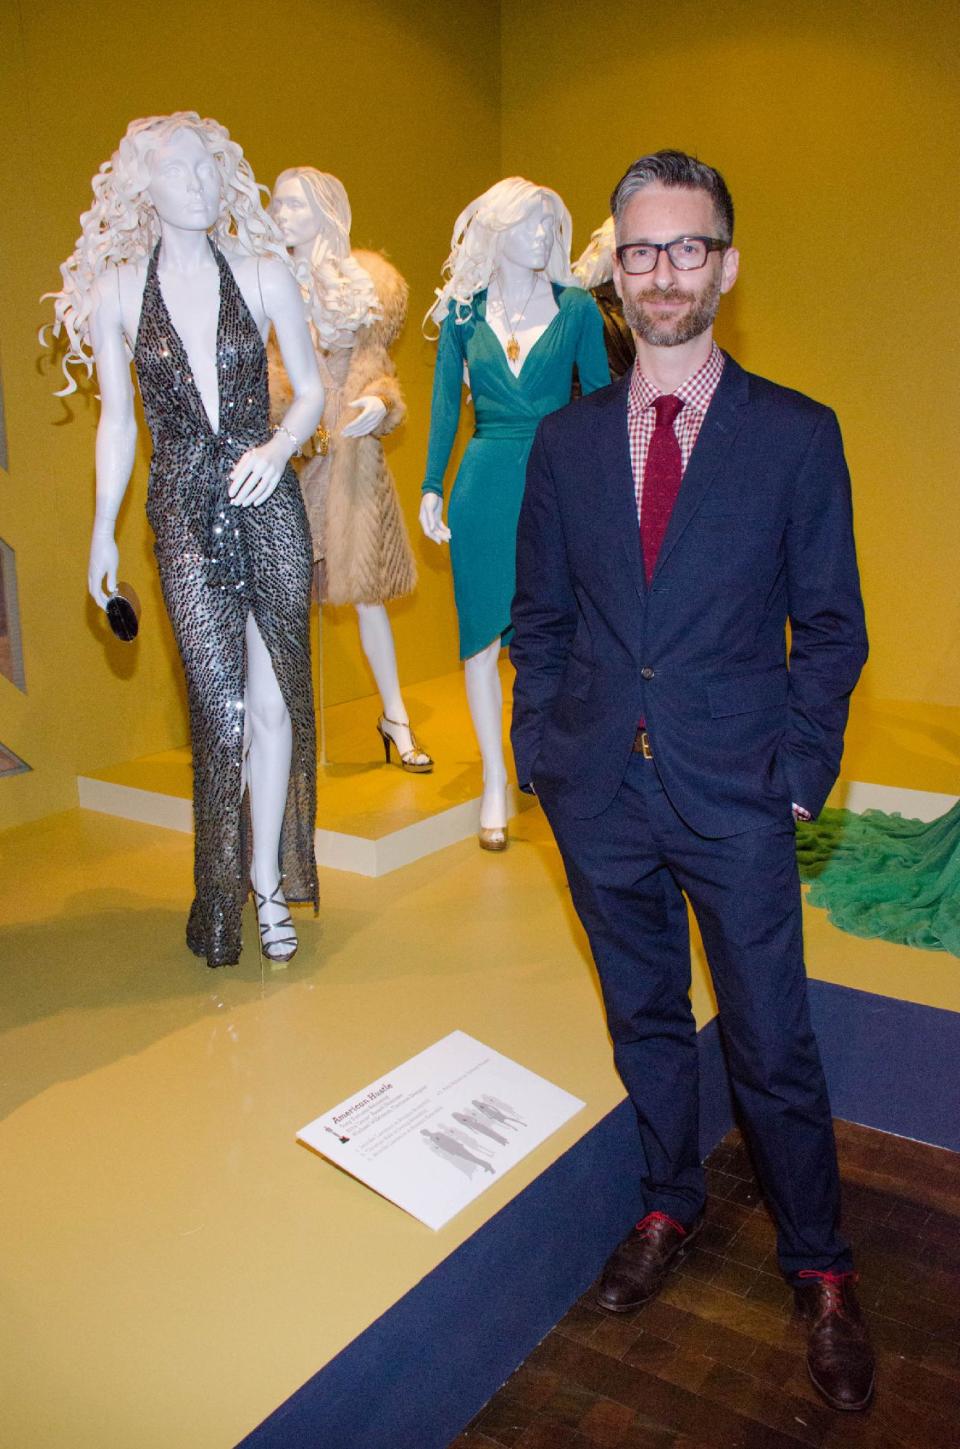 In this Saturday, Feb. 8, 2014 photo, costume designer Michael Wilkinson attends the 22nd annual Art of Motion Picture Costume Design Exhibit, in Los Angeles, Calif. Wilkinson's costumes for the film "American Hustle," are nominated for an Academy Award. The Fashion Institute of Design & Merchandising holds its free-to-the-public Art of Motion Picture Costume Design exhibit on view until April 26, 2014, featuring this year's five Oscar nominees: "American Hustle," "The Grandmaster," "The Great Gatsby," "The Invisible Woman" and "12 Years A Slave," in Los Angeles. (Photo by Tonya Wise/Invision/AP)